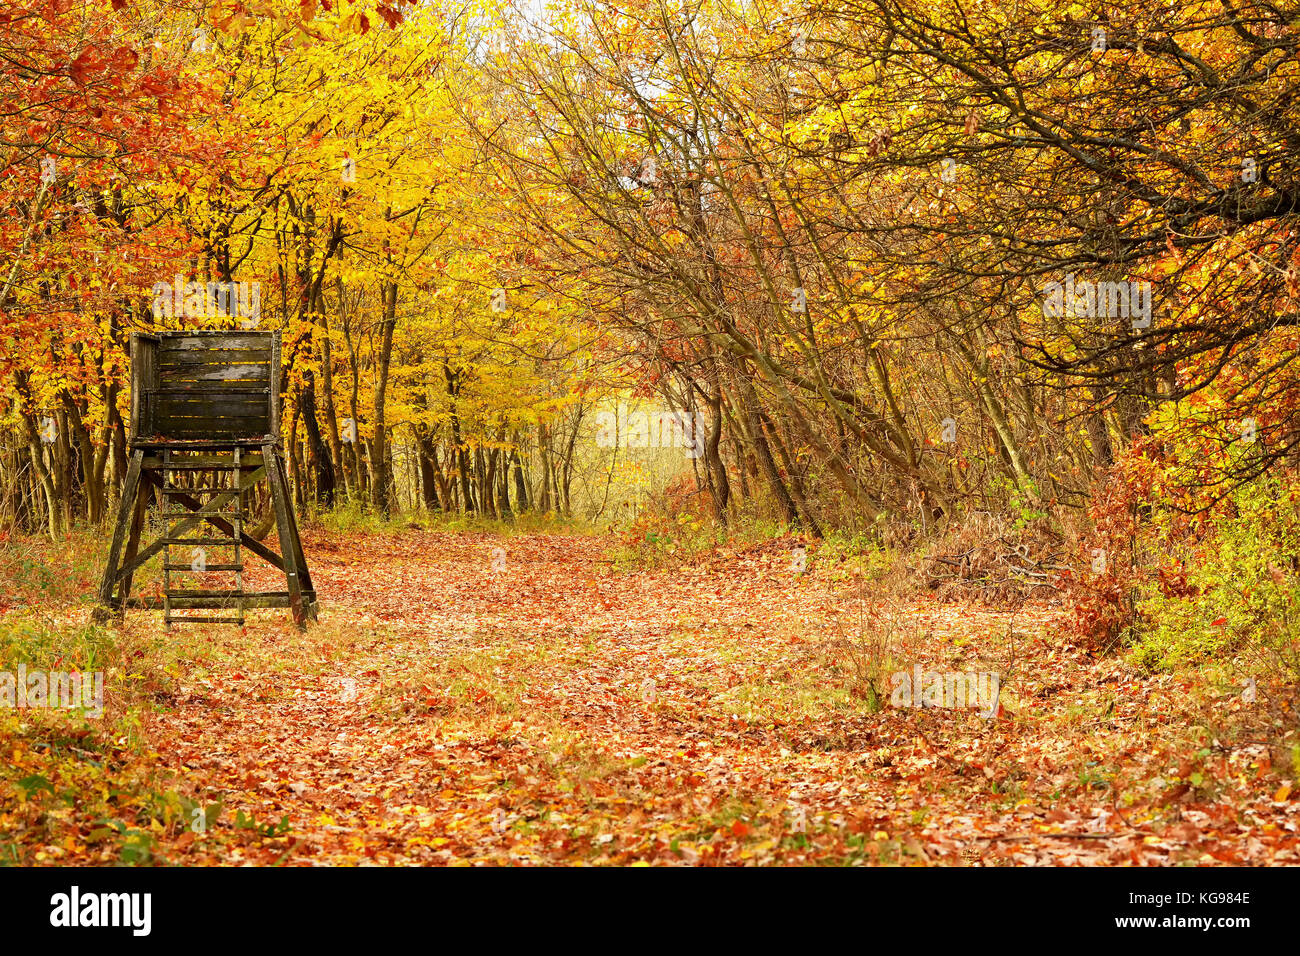 Beautifil autumn forest in November, Hungary Stock Photo